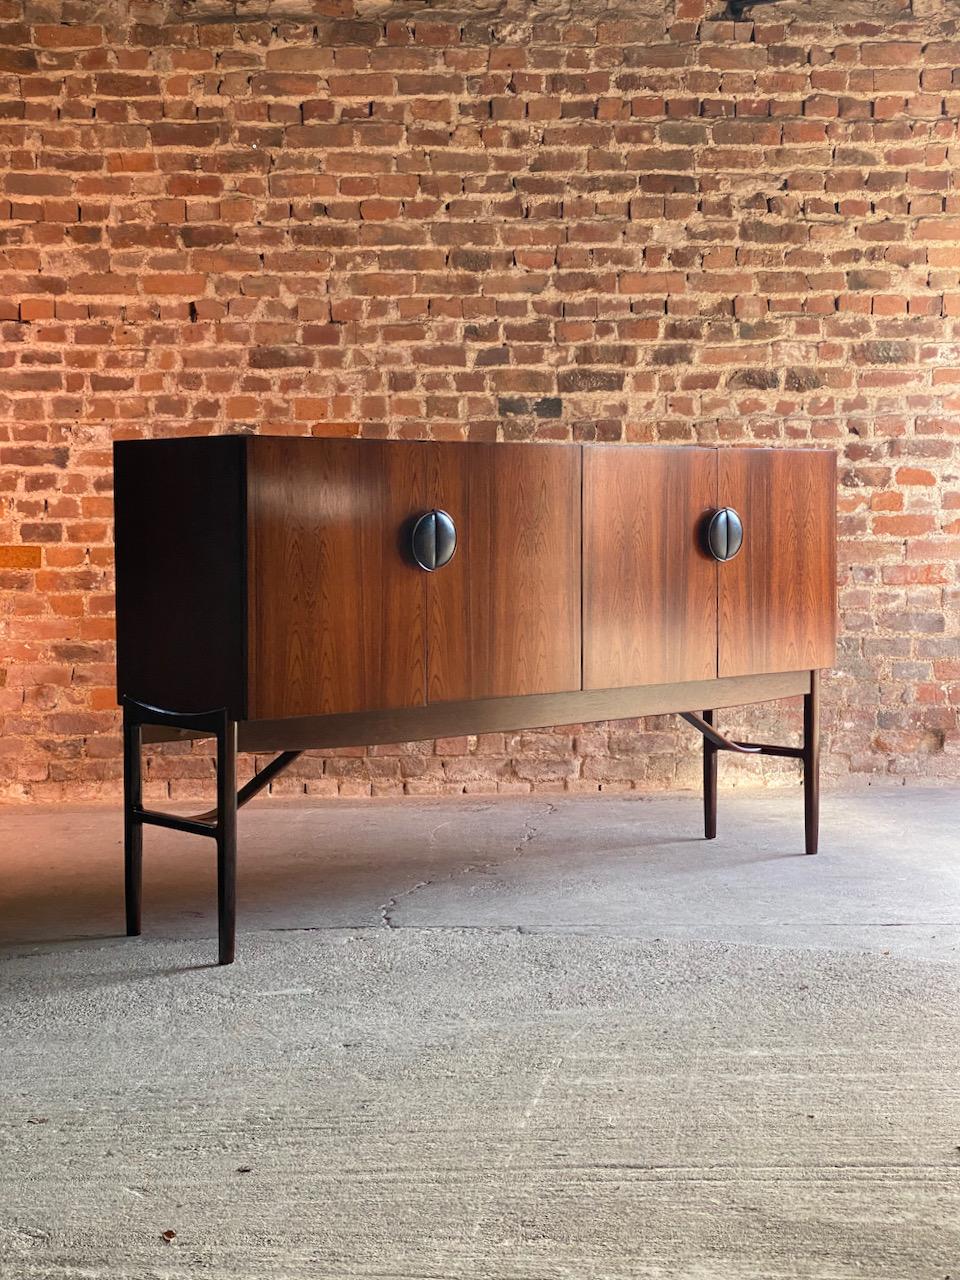 Ib Kofod Larsen Model 4060 Rio rosewood sideboard, Circa 1964

Magnificent mid century Danish design Ib Kofod Larsen Model 4060 Rio rosewood sideboard circa 1964, manufactured by G Plan E Gomme Limited, The 'Danish Range' was aimed at the top end